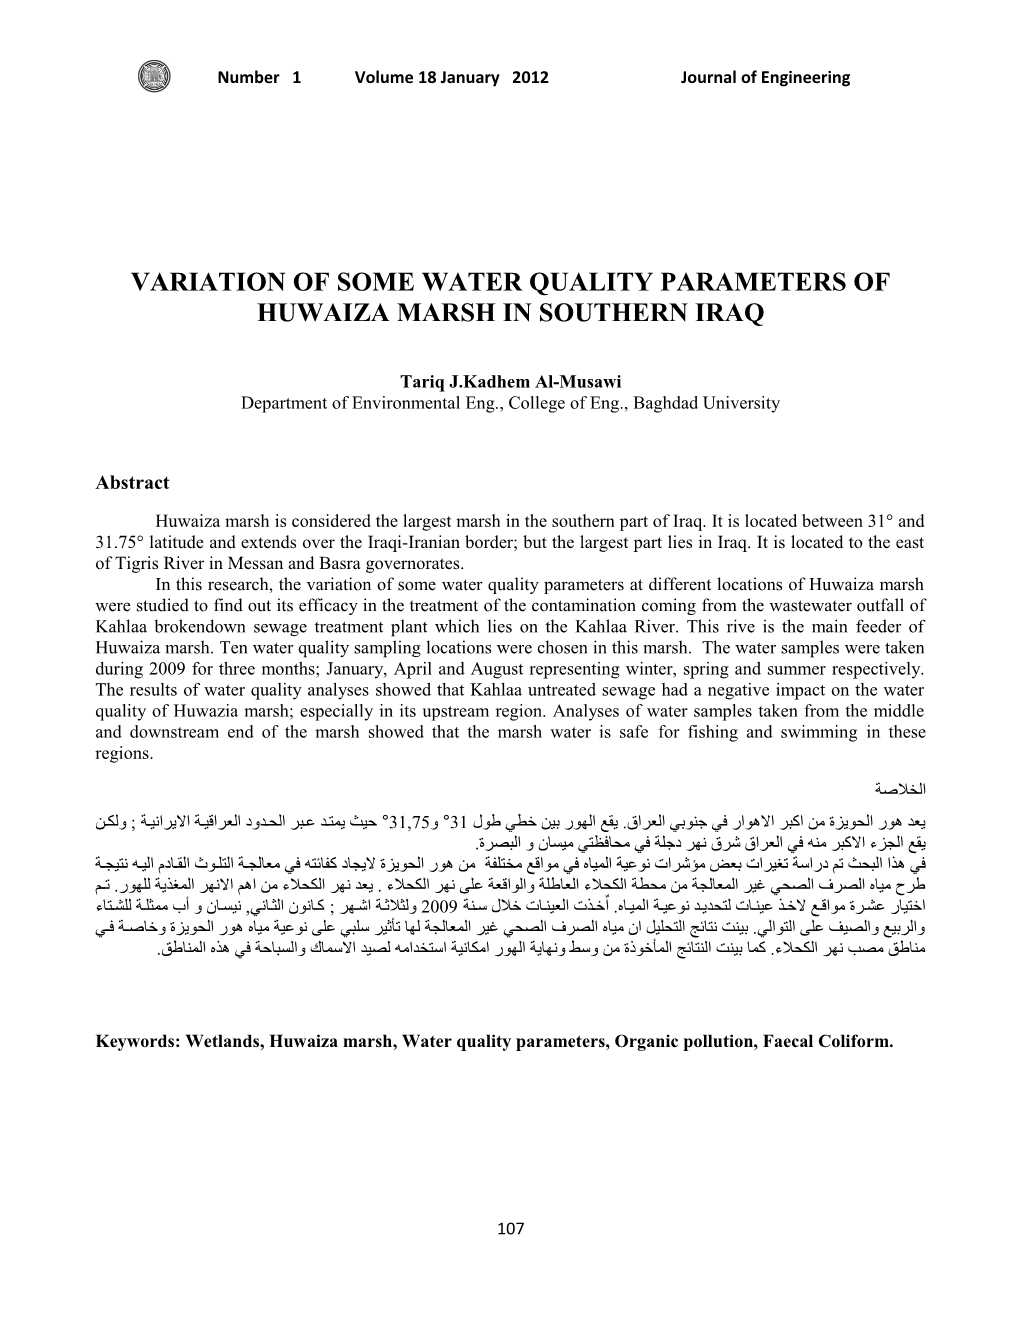 Variation of Some Water Quality Parameters of Huwaiza Marsh in Southern Iraq